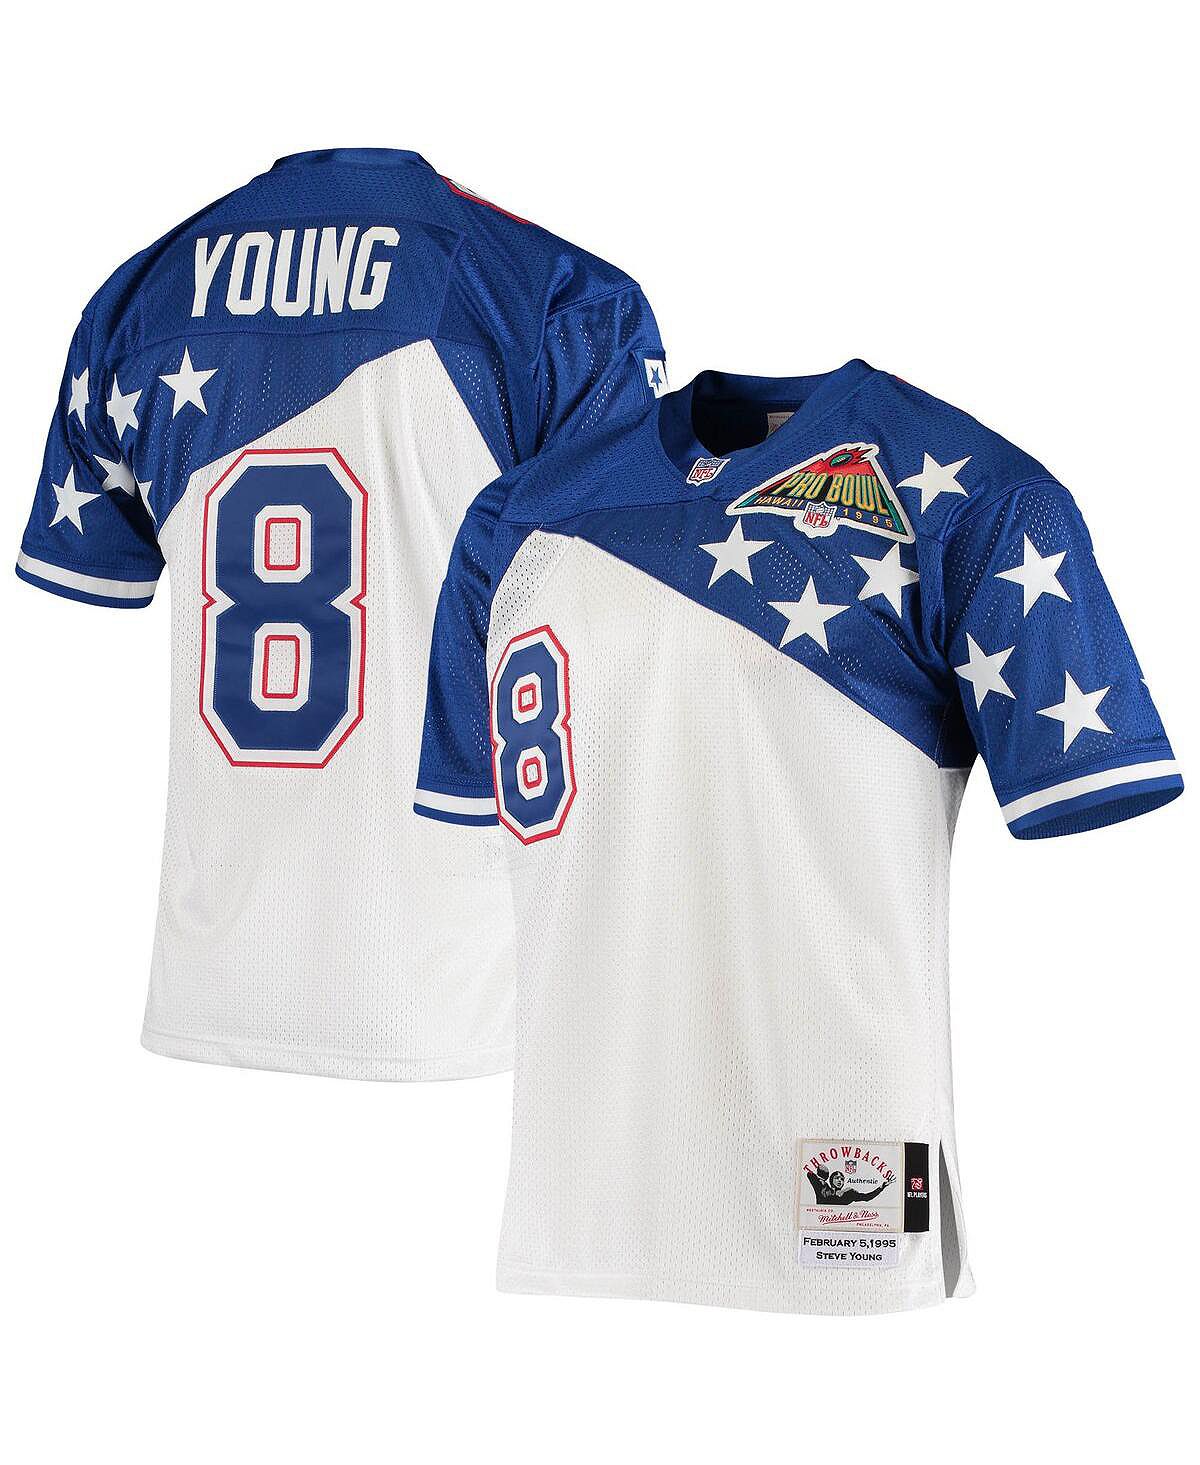 Мужская футболка steve young white, blue nfc 1994 pro bowl authentic jersey Mitchell & Ness, мульти